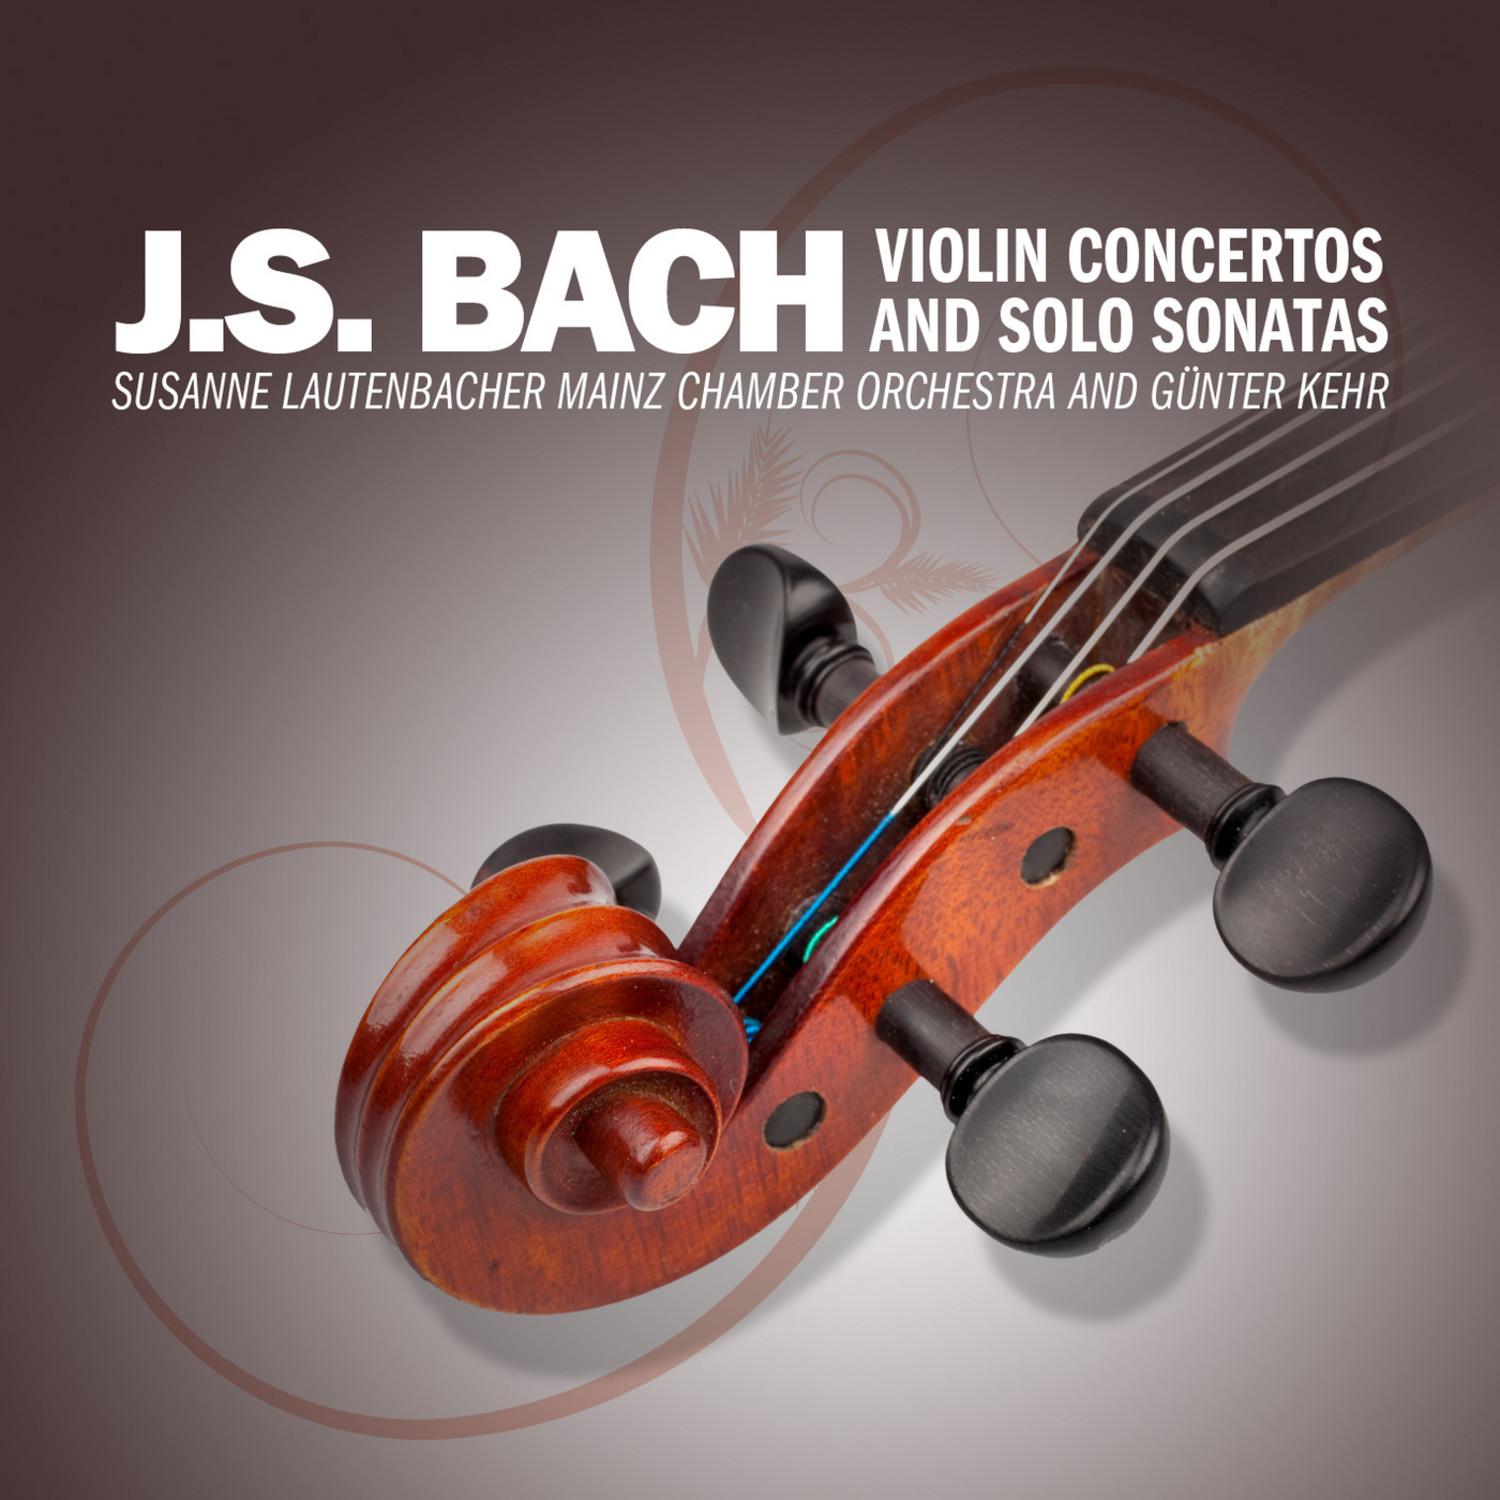 Concerto No. 1 in A Minor for Violin and Strings, BWV 1041: II. Andante